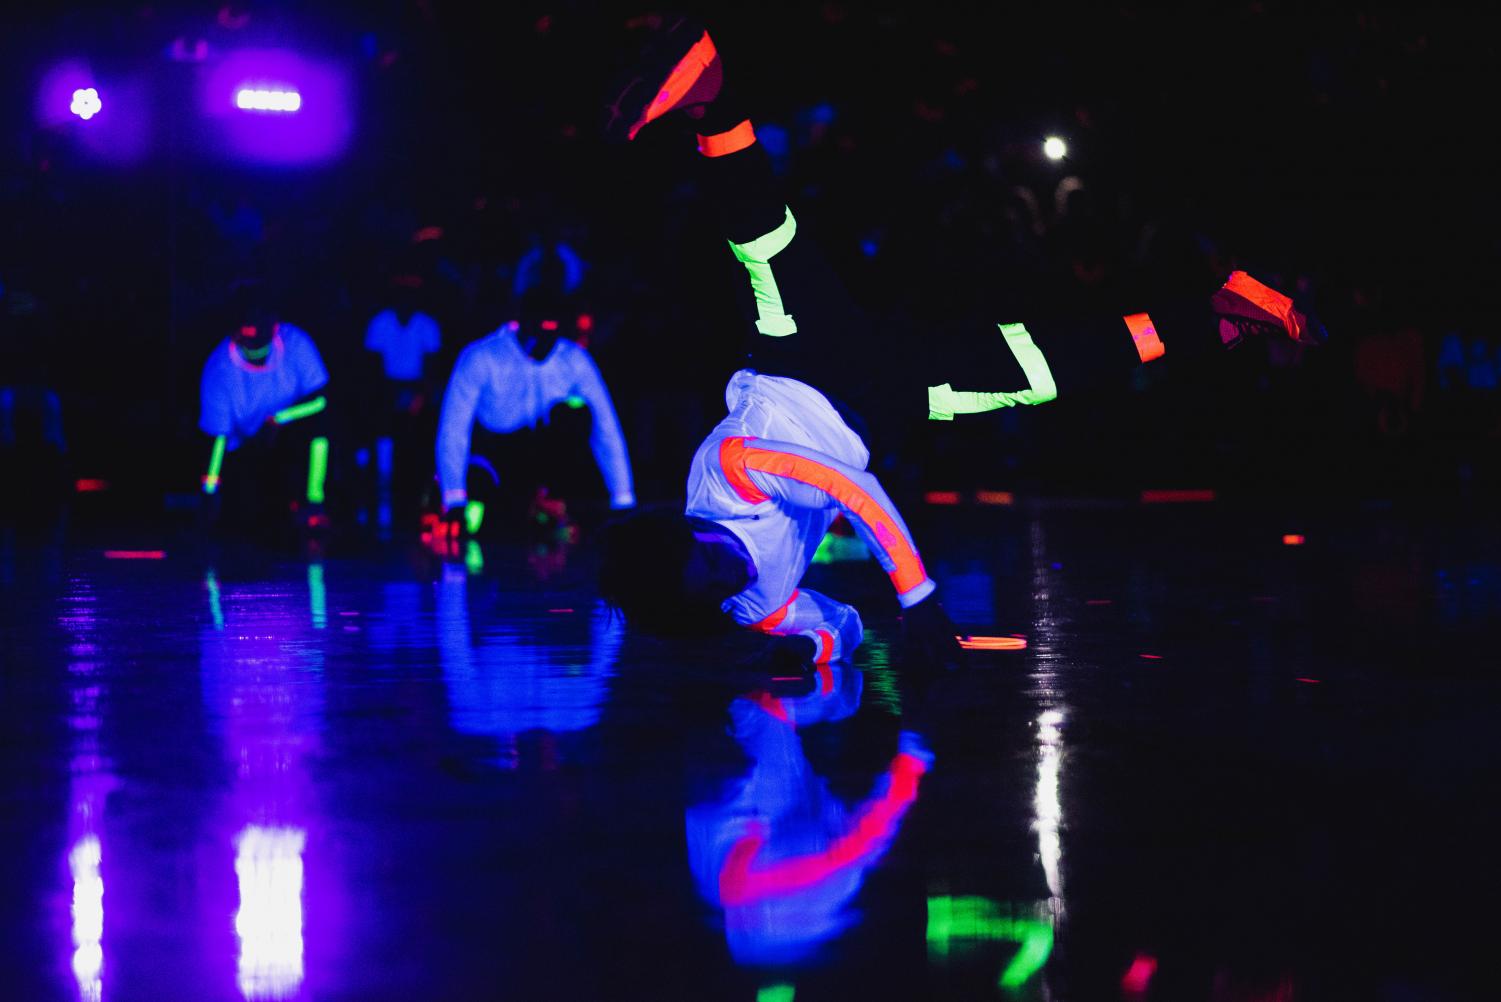 Students+Attend+Annual+Blacklight+Pep+Rally